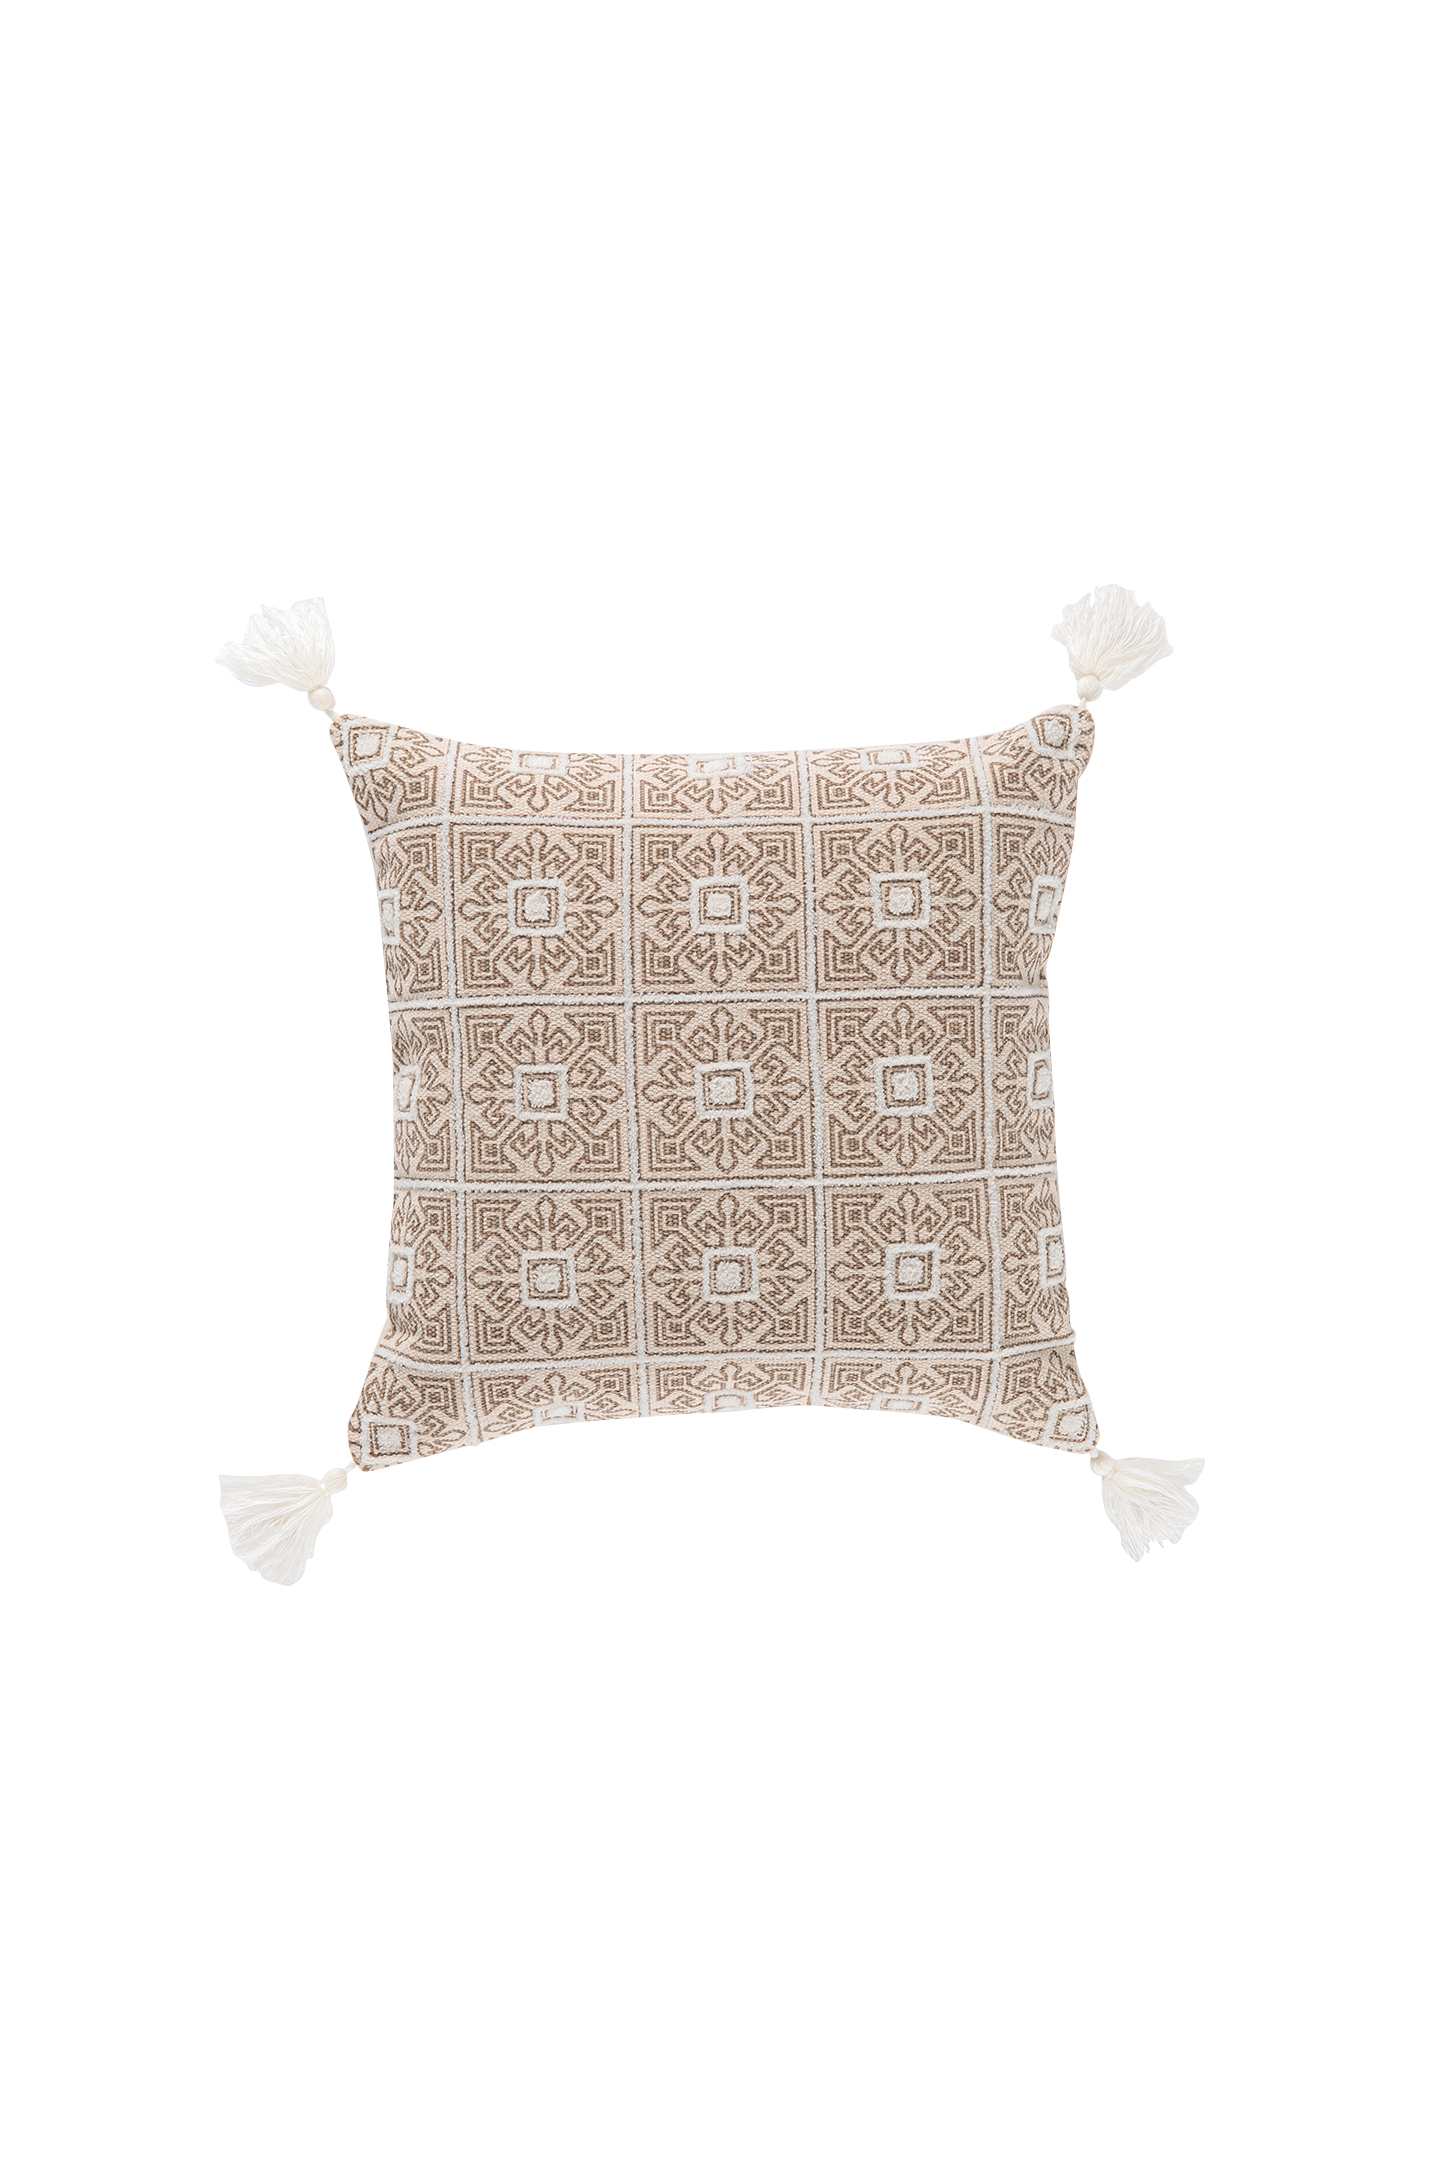 Discontinued - Soule Pillow Cover, 20" x 20" - Image 0